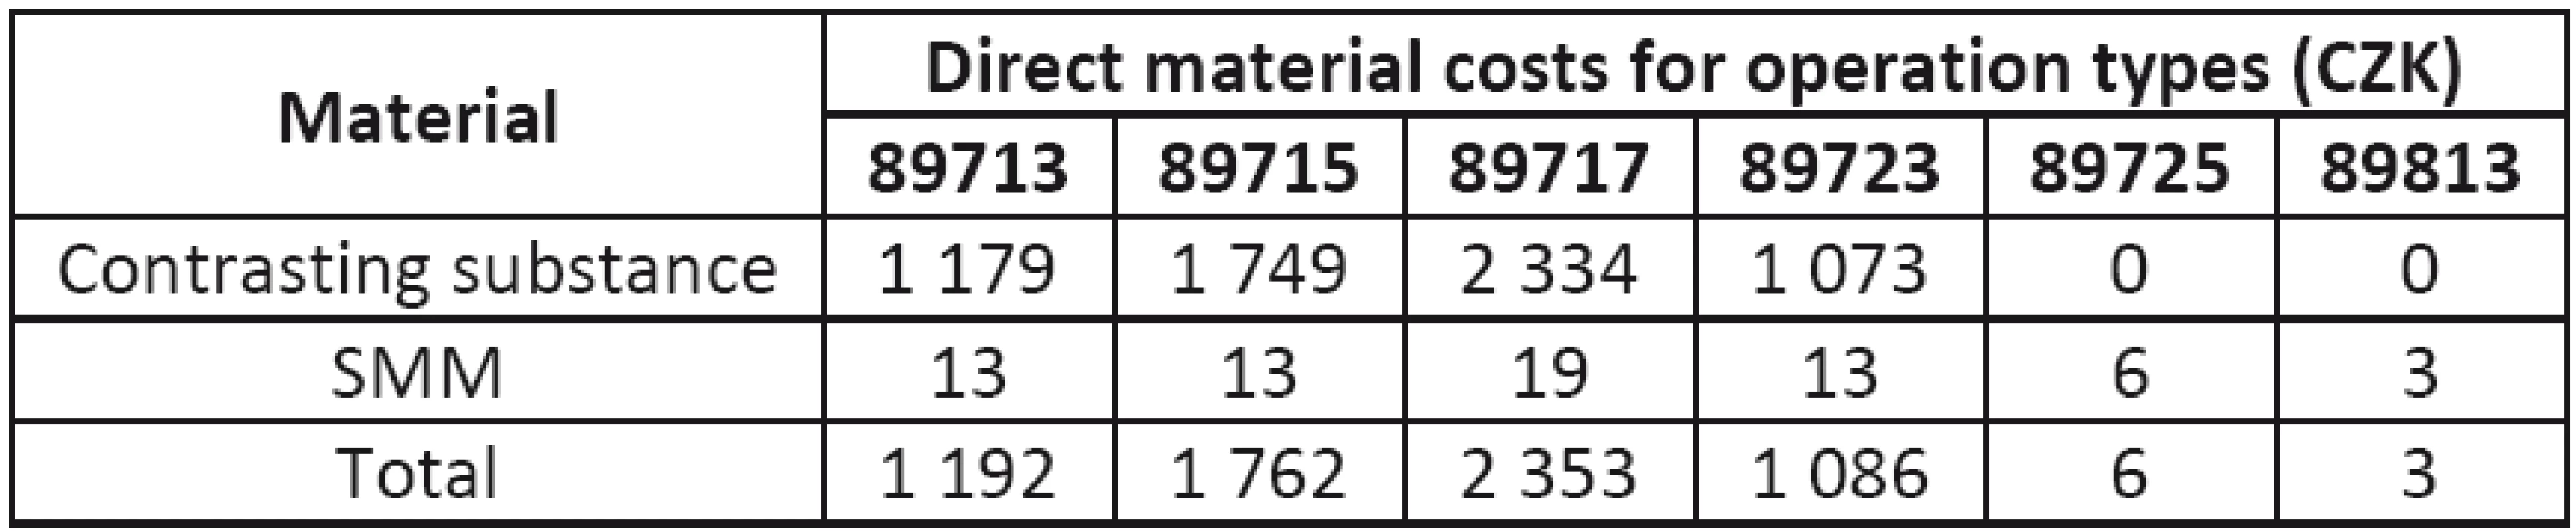 Total direct material costs for individual operations